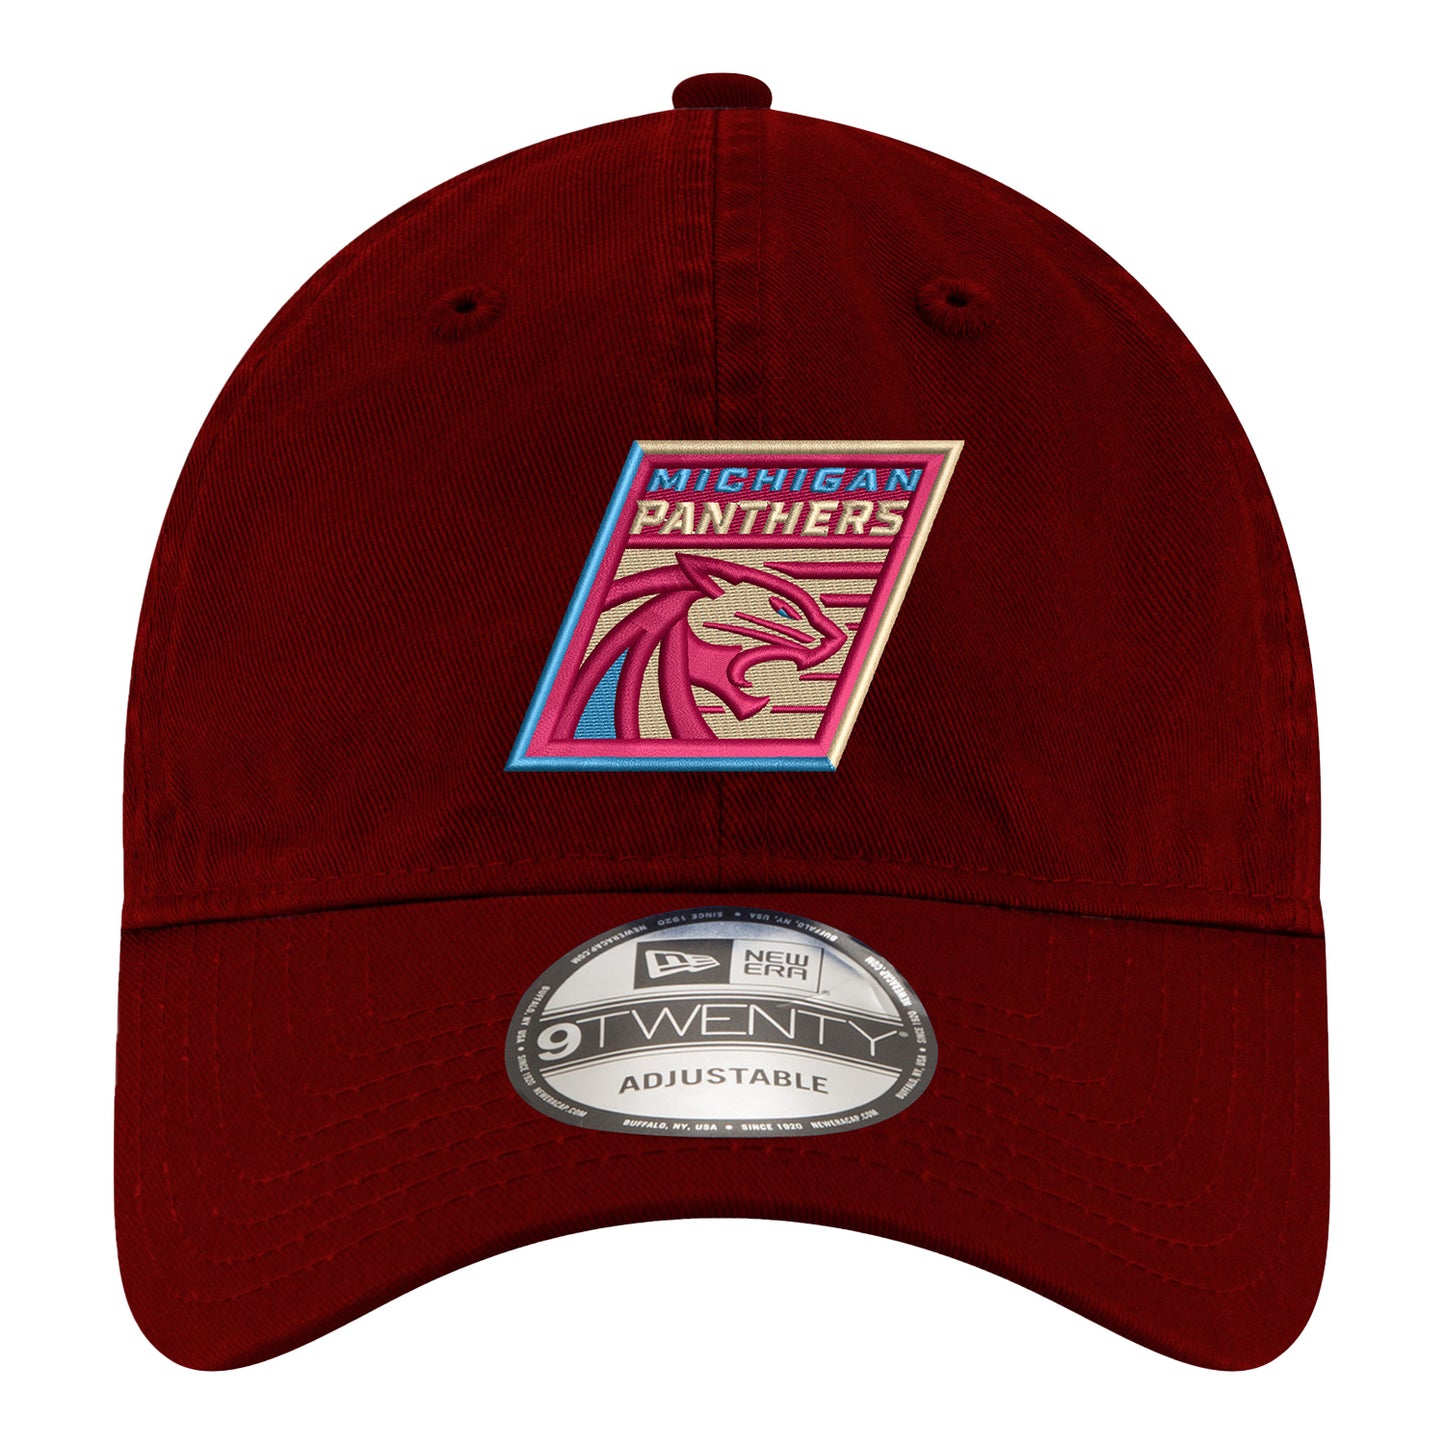 New Era 9TWENTY Michigan Panthers Adjustable Hat In Red - Front View